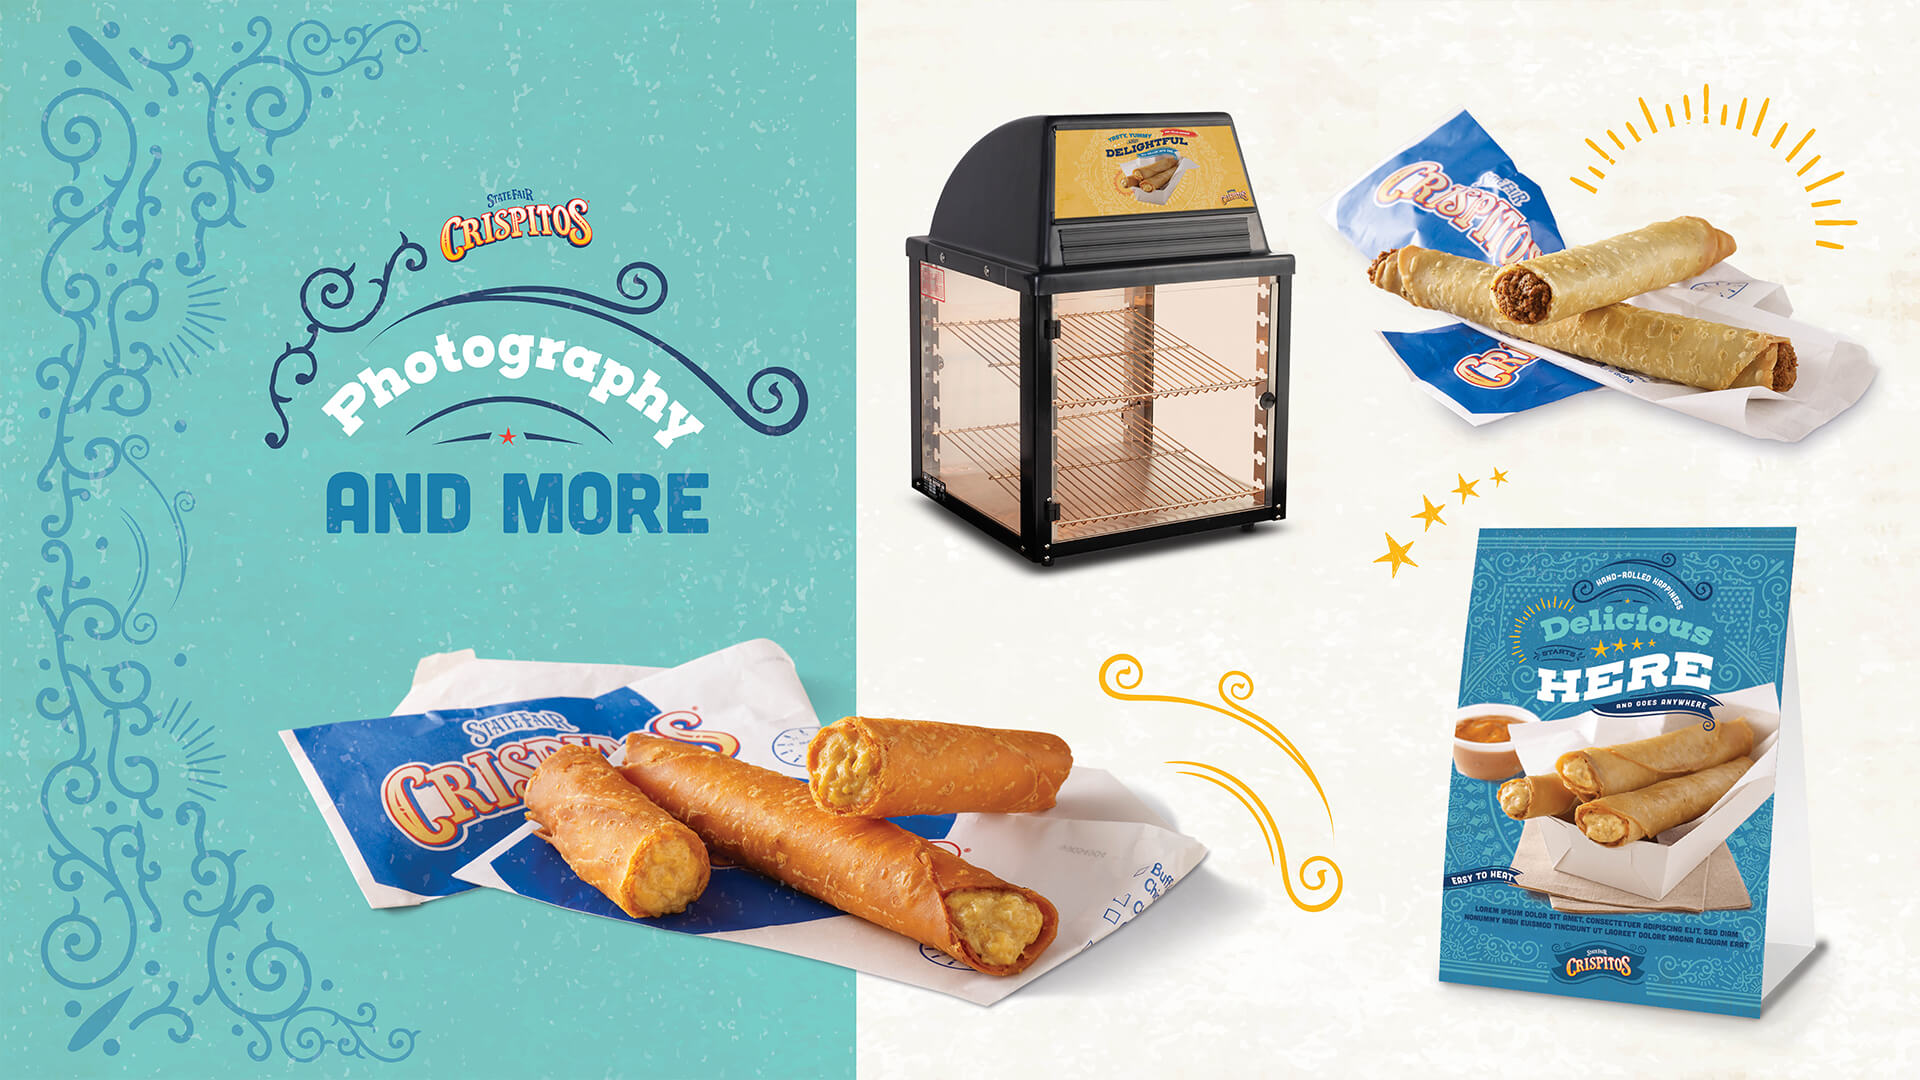 State Fair Crispitos Photography & Warmer POS & Delicious Here Table Tent